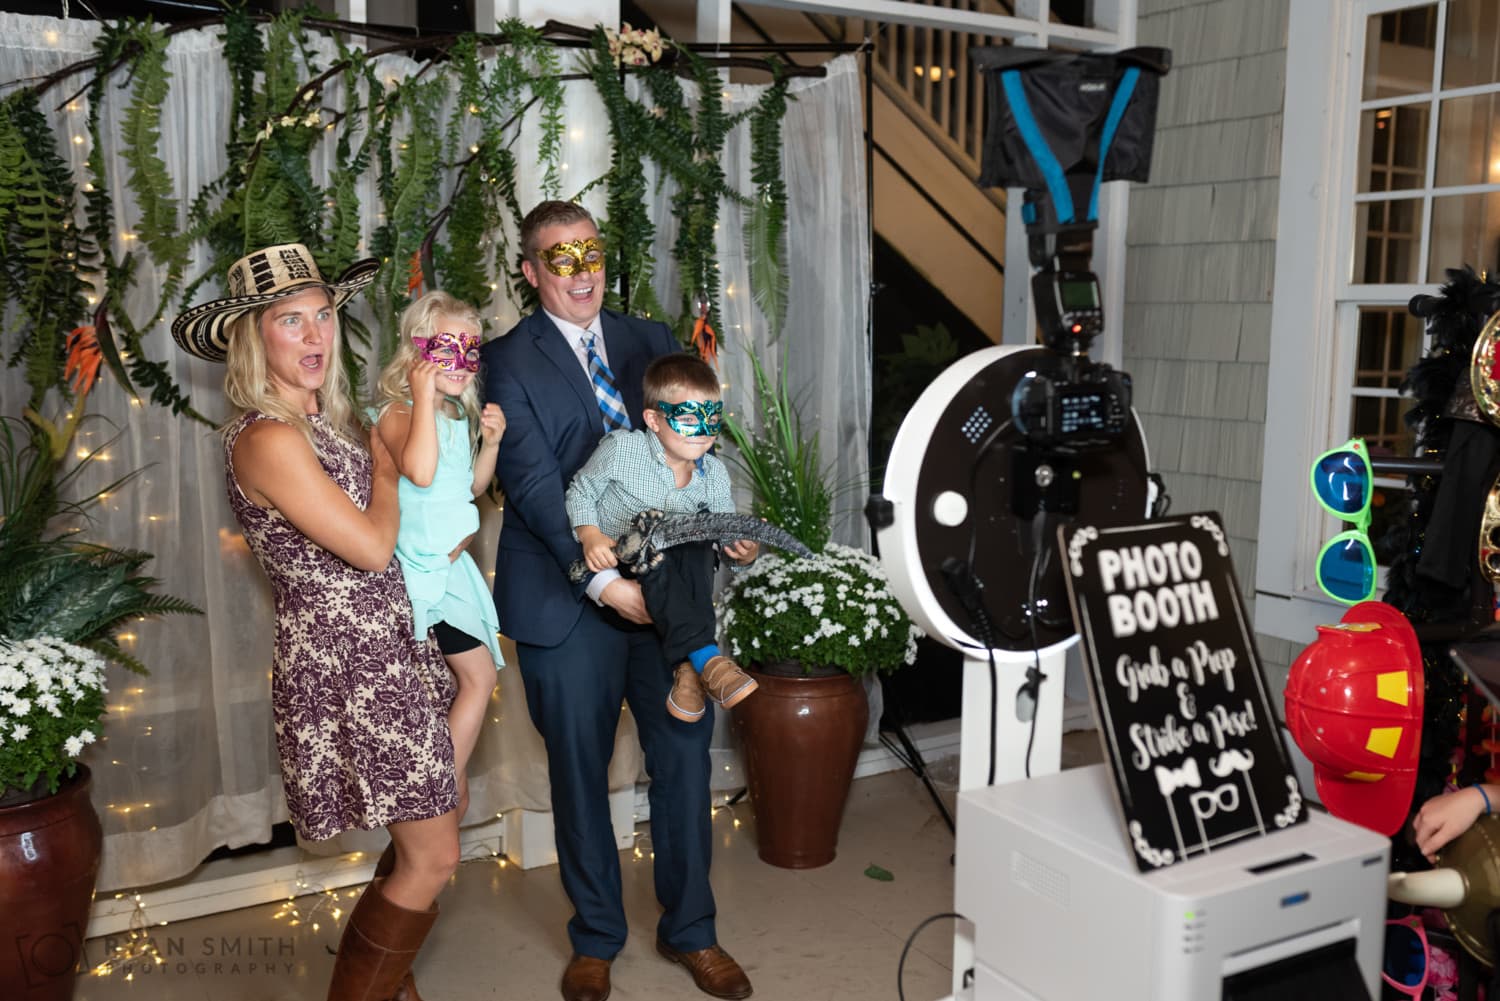 Photo Booth with custom background for wedding in Pawleys Island - Reserve Harbor Yacht Club